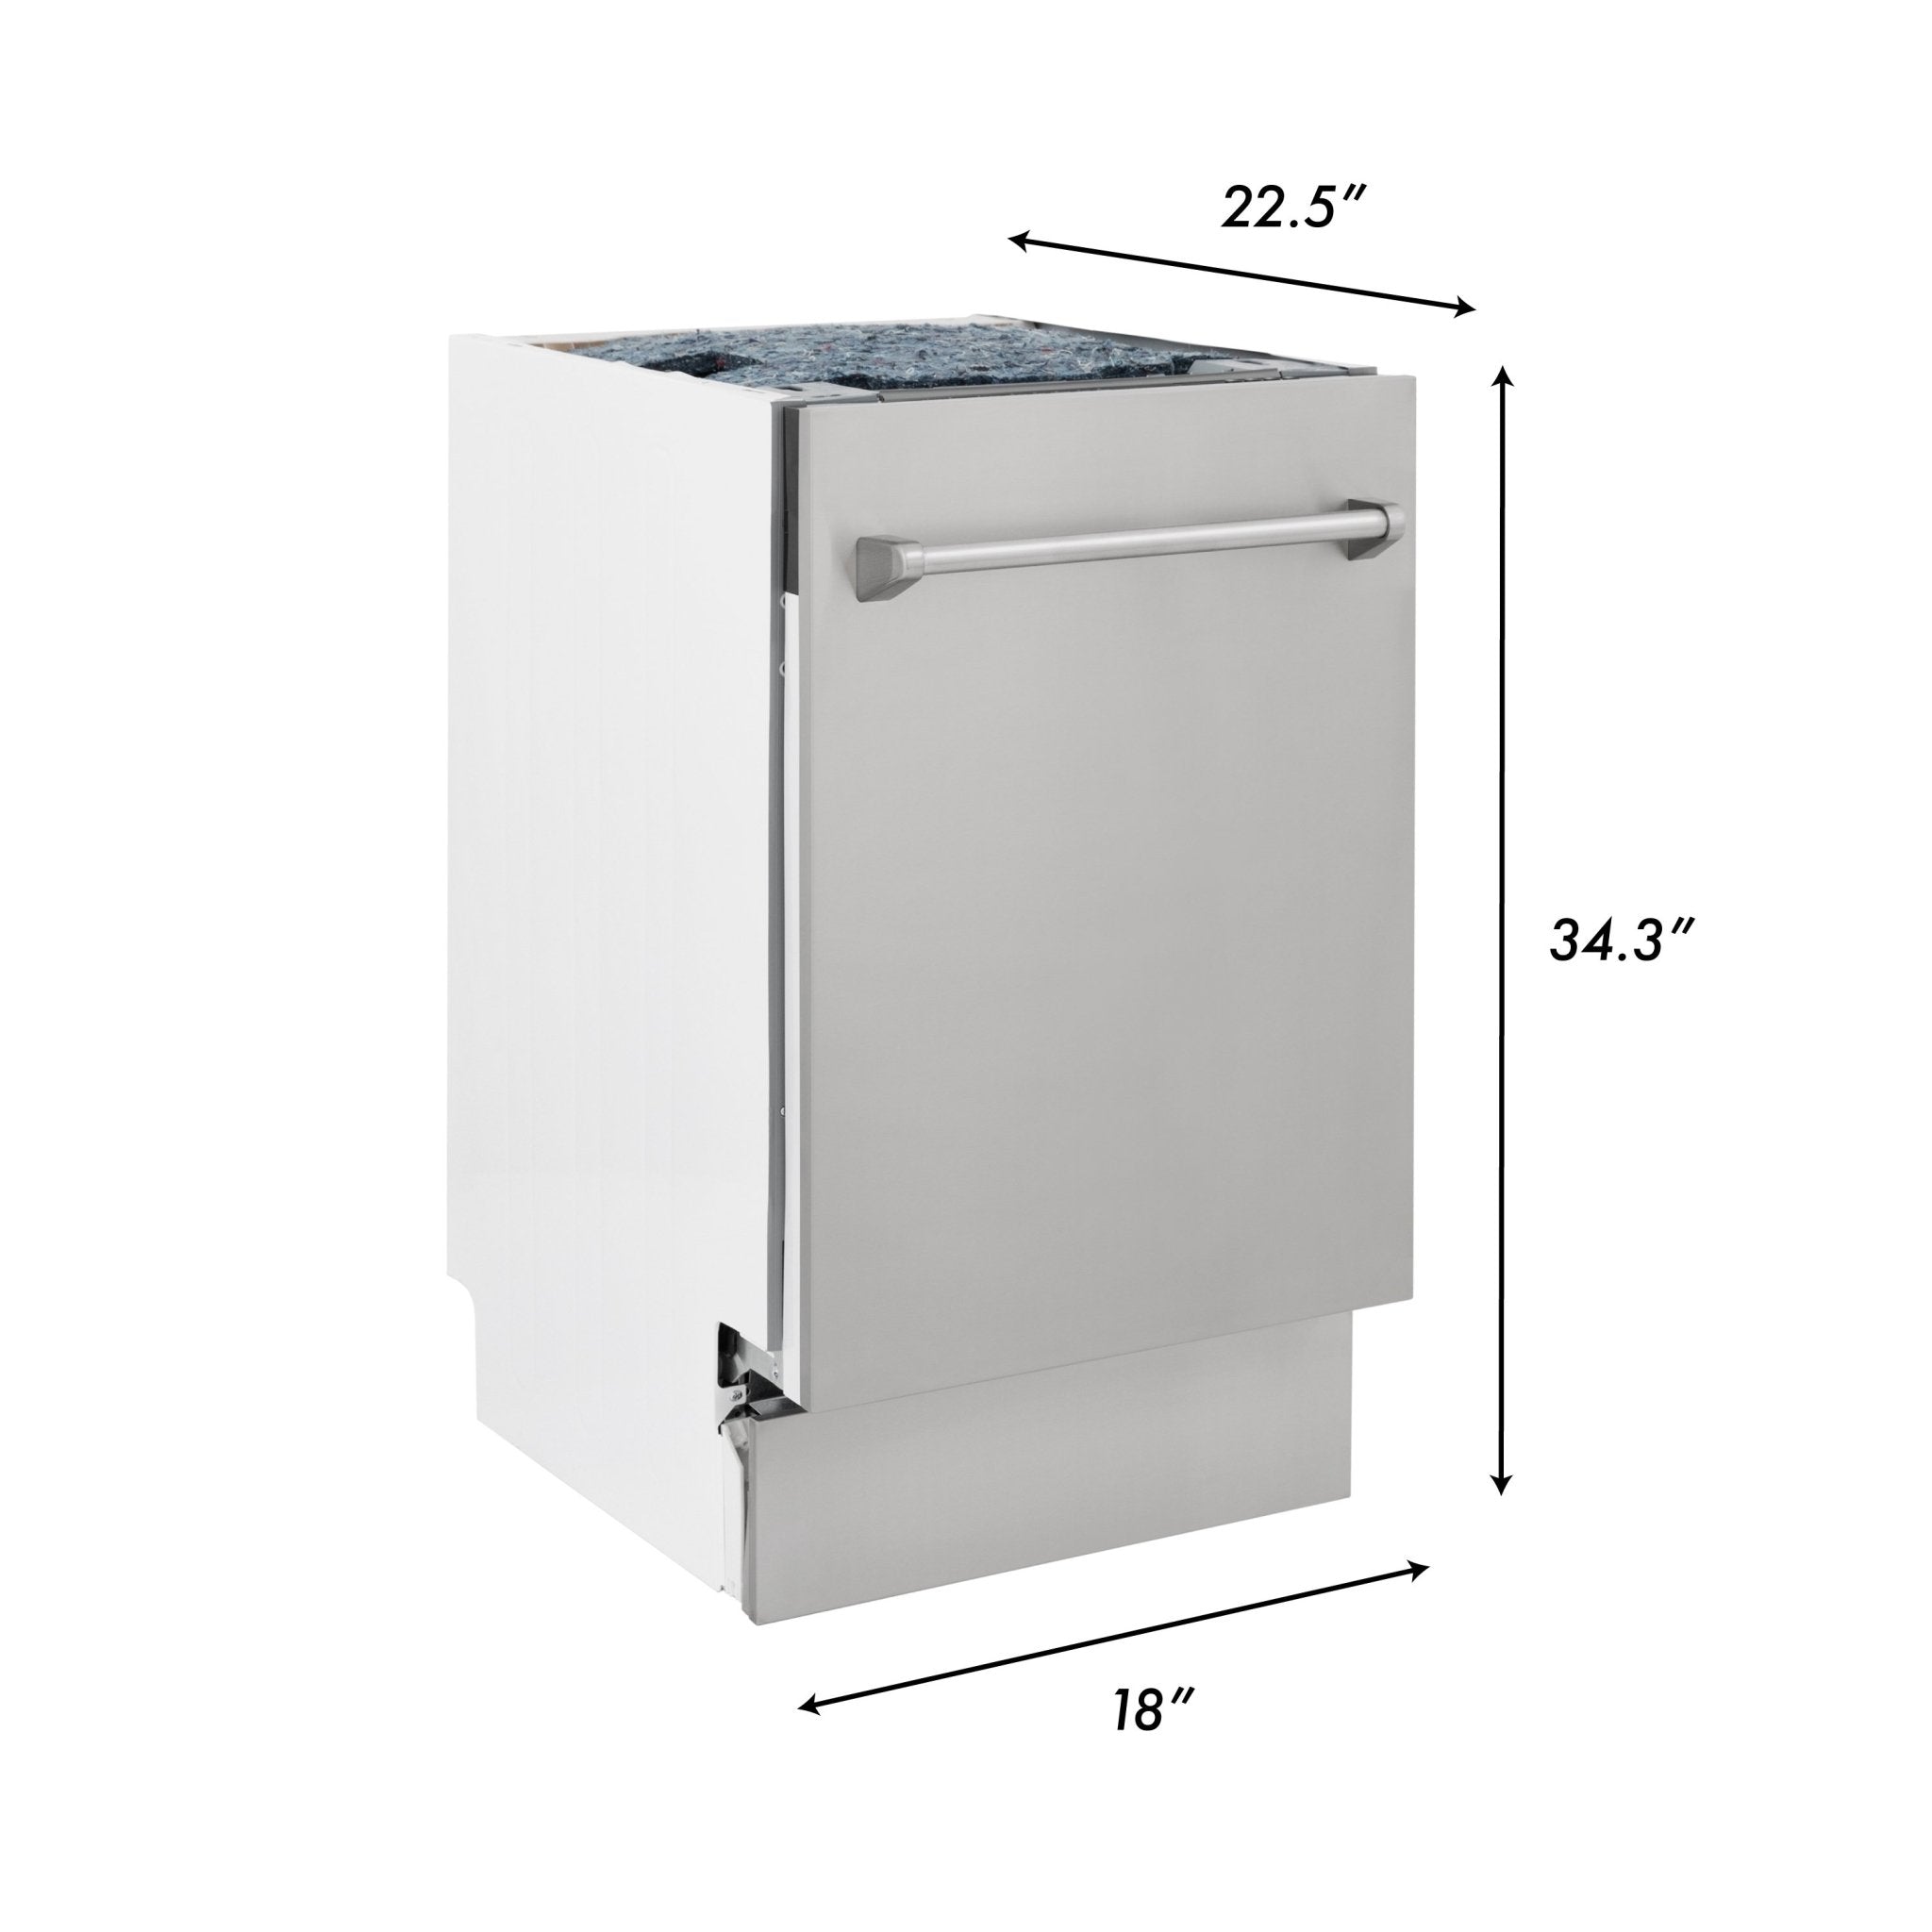 ZLINE Autograph Edition 18" Compact 3rd Rack Top Control Dishwasher in White Matte with Accent Handle, 51dBa (DWVZ-WM-18) - New Star Living